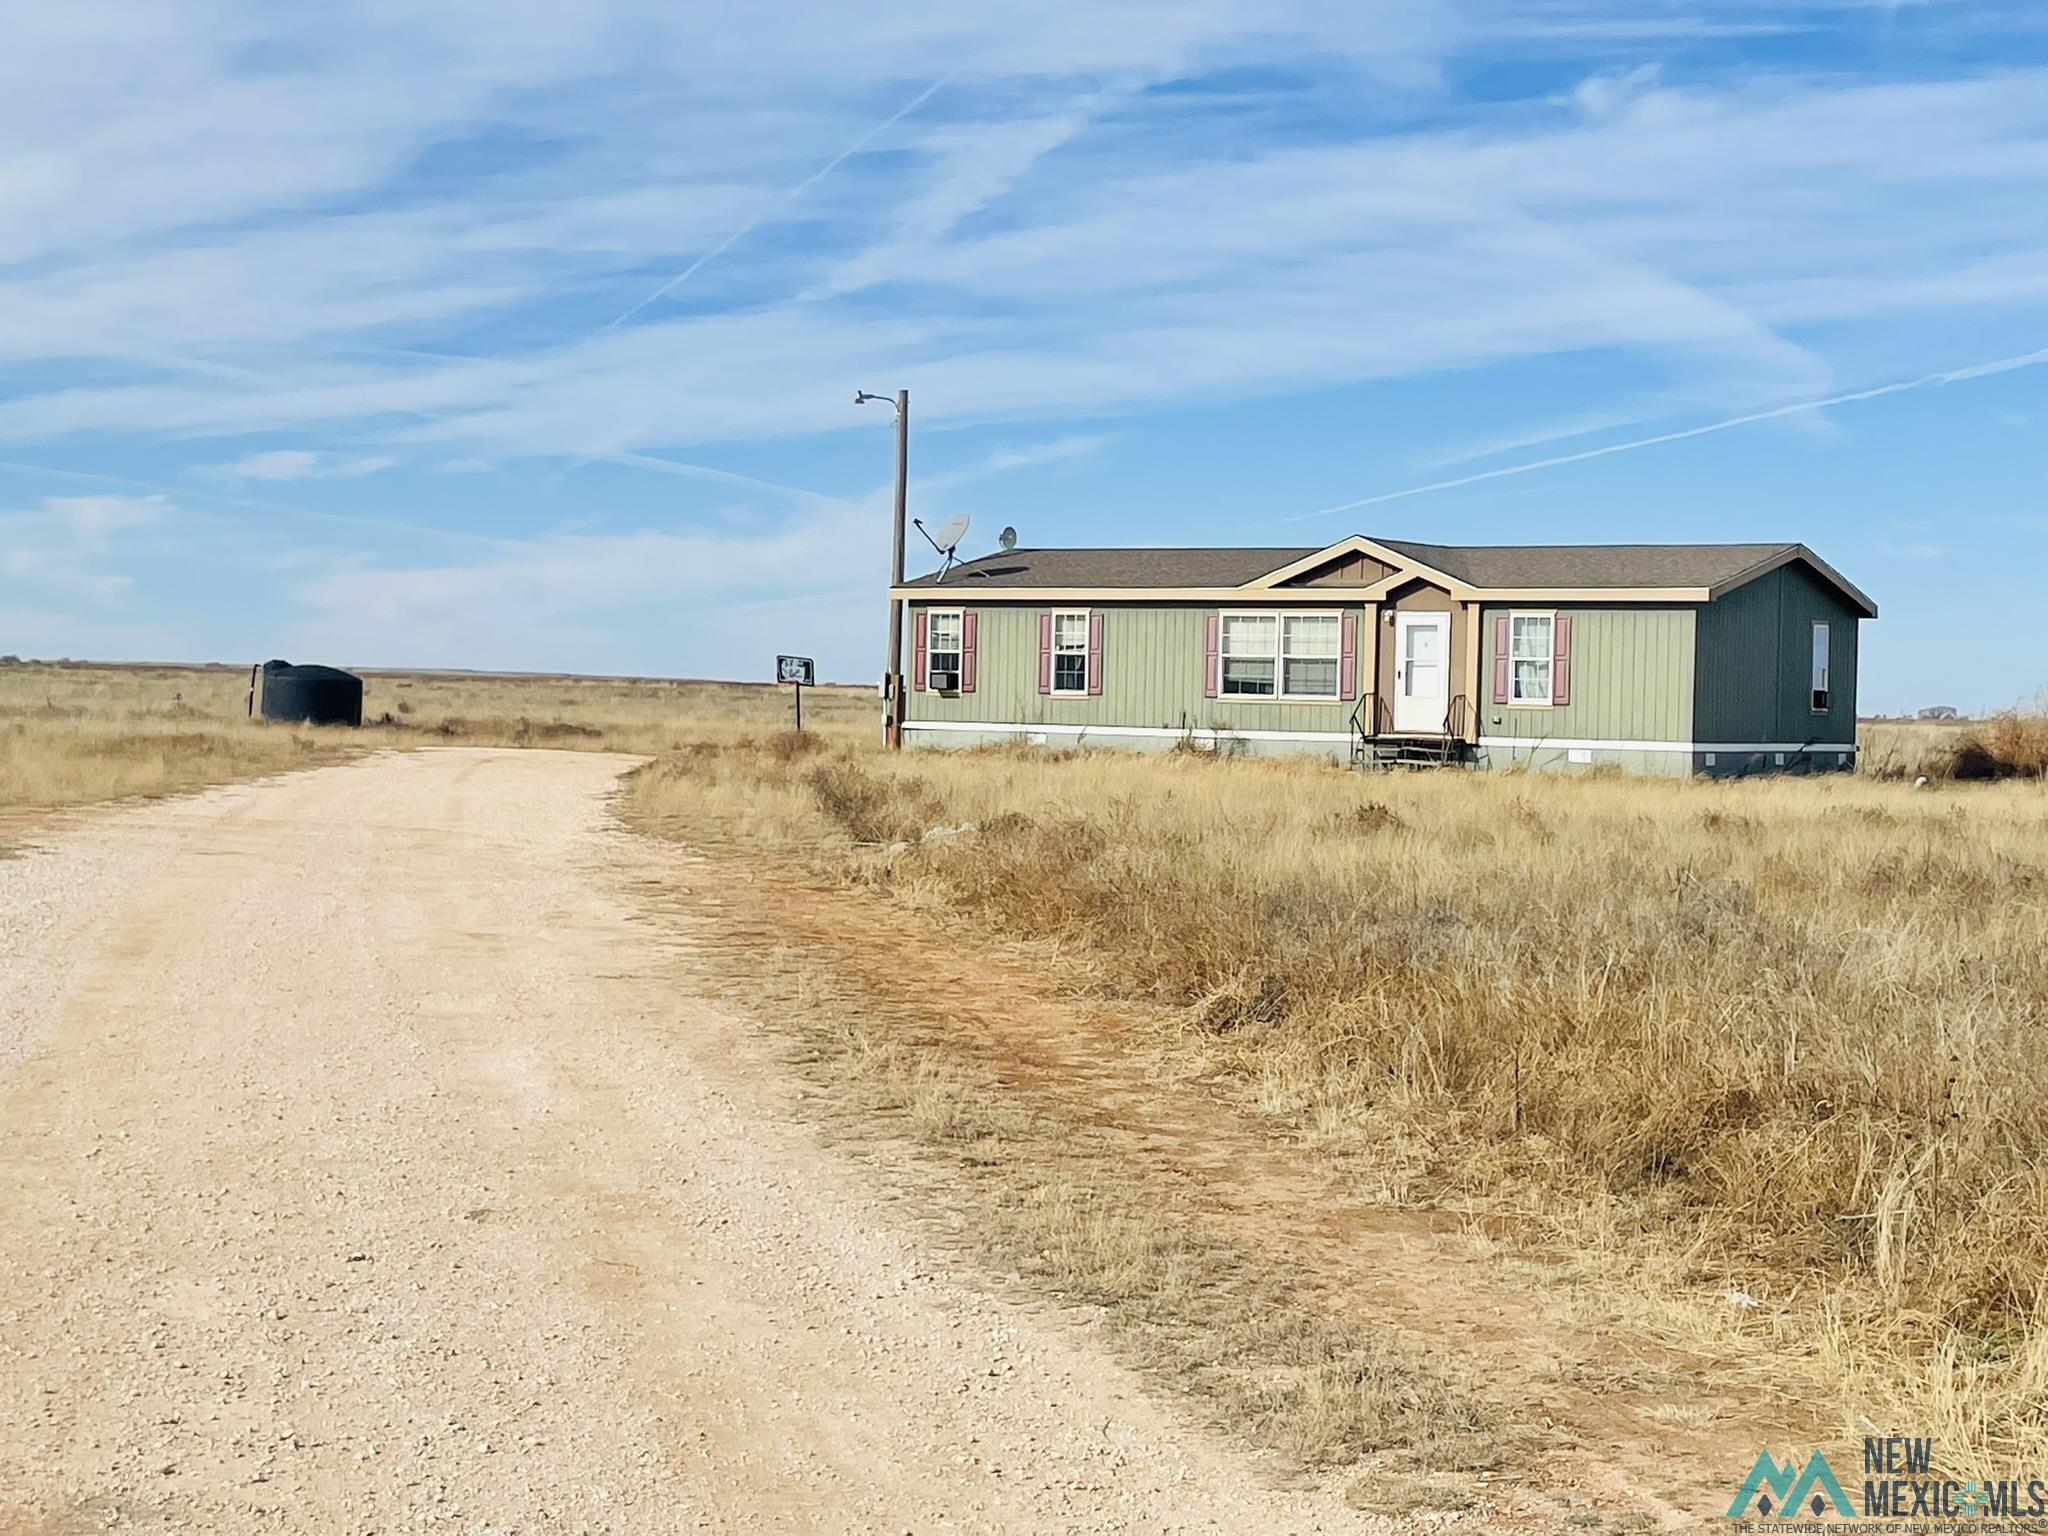 570S Roosevelt Rd AD Portales, NM Photo